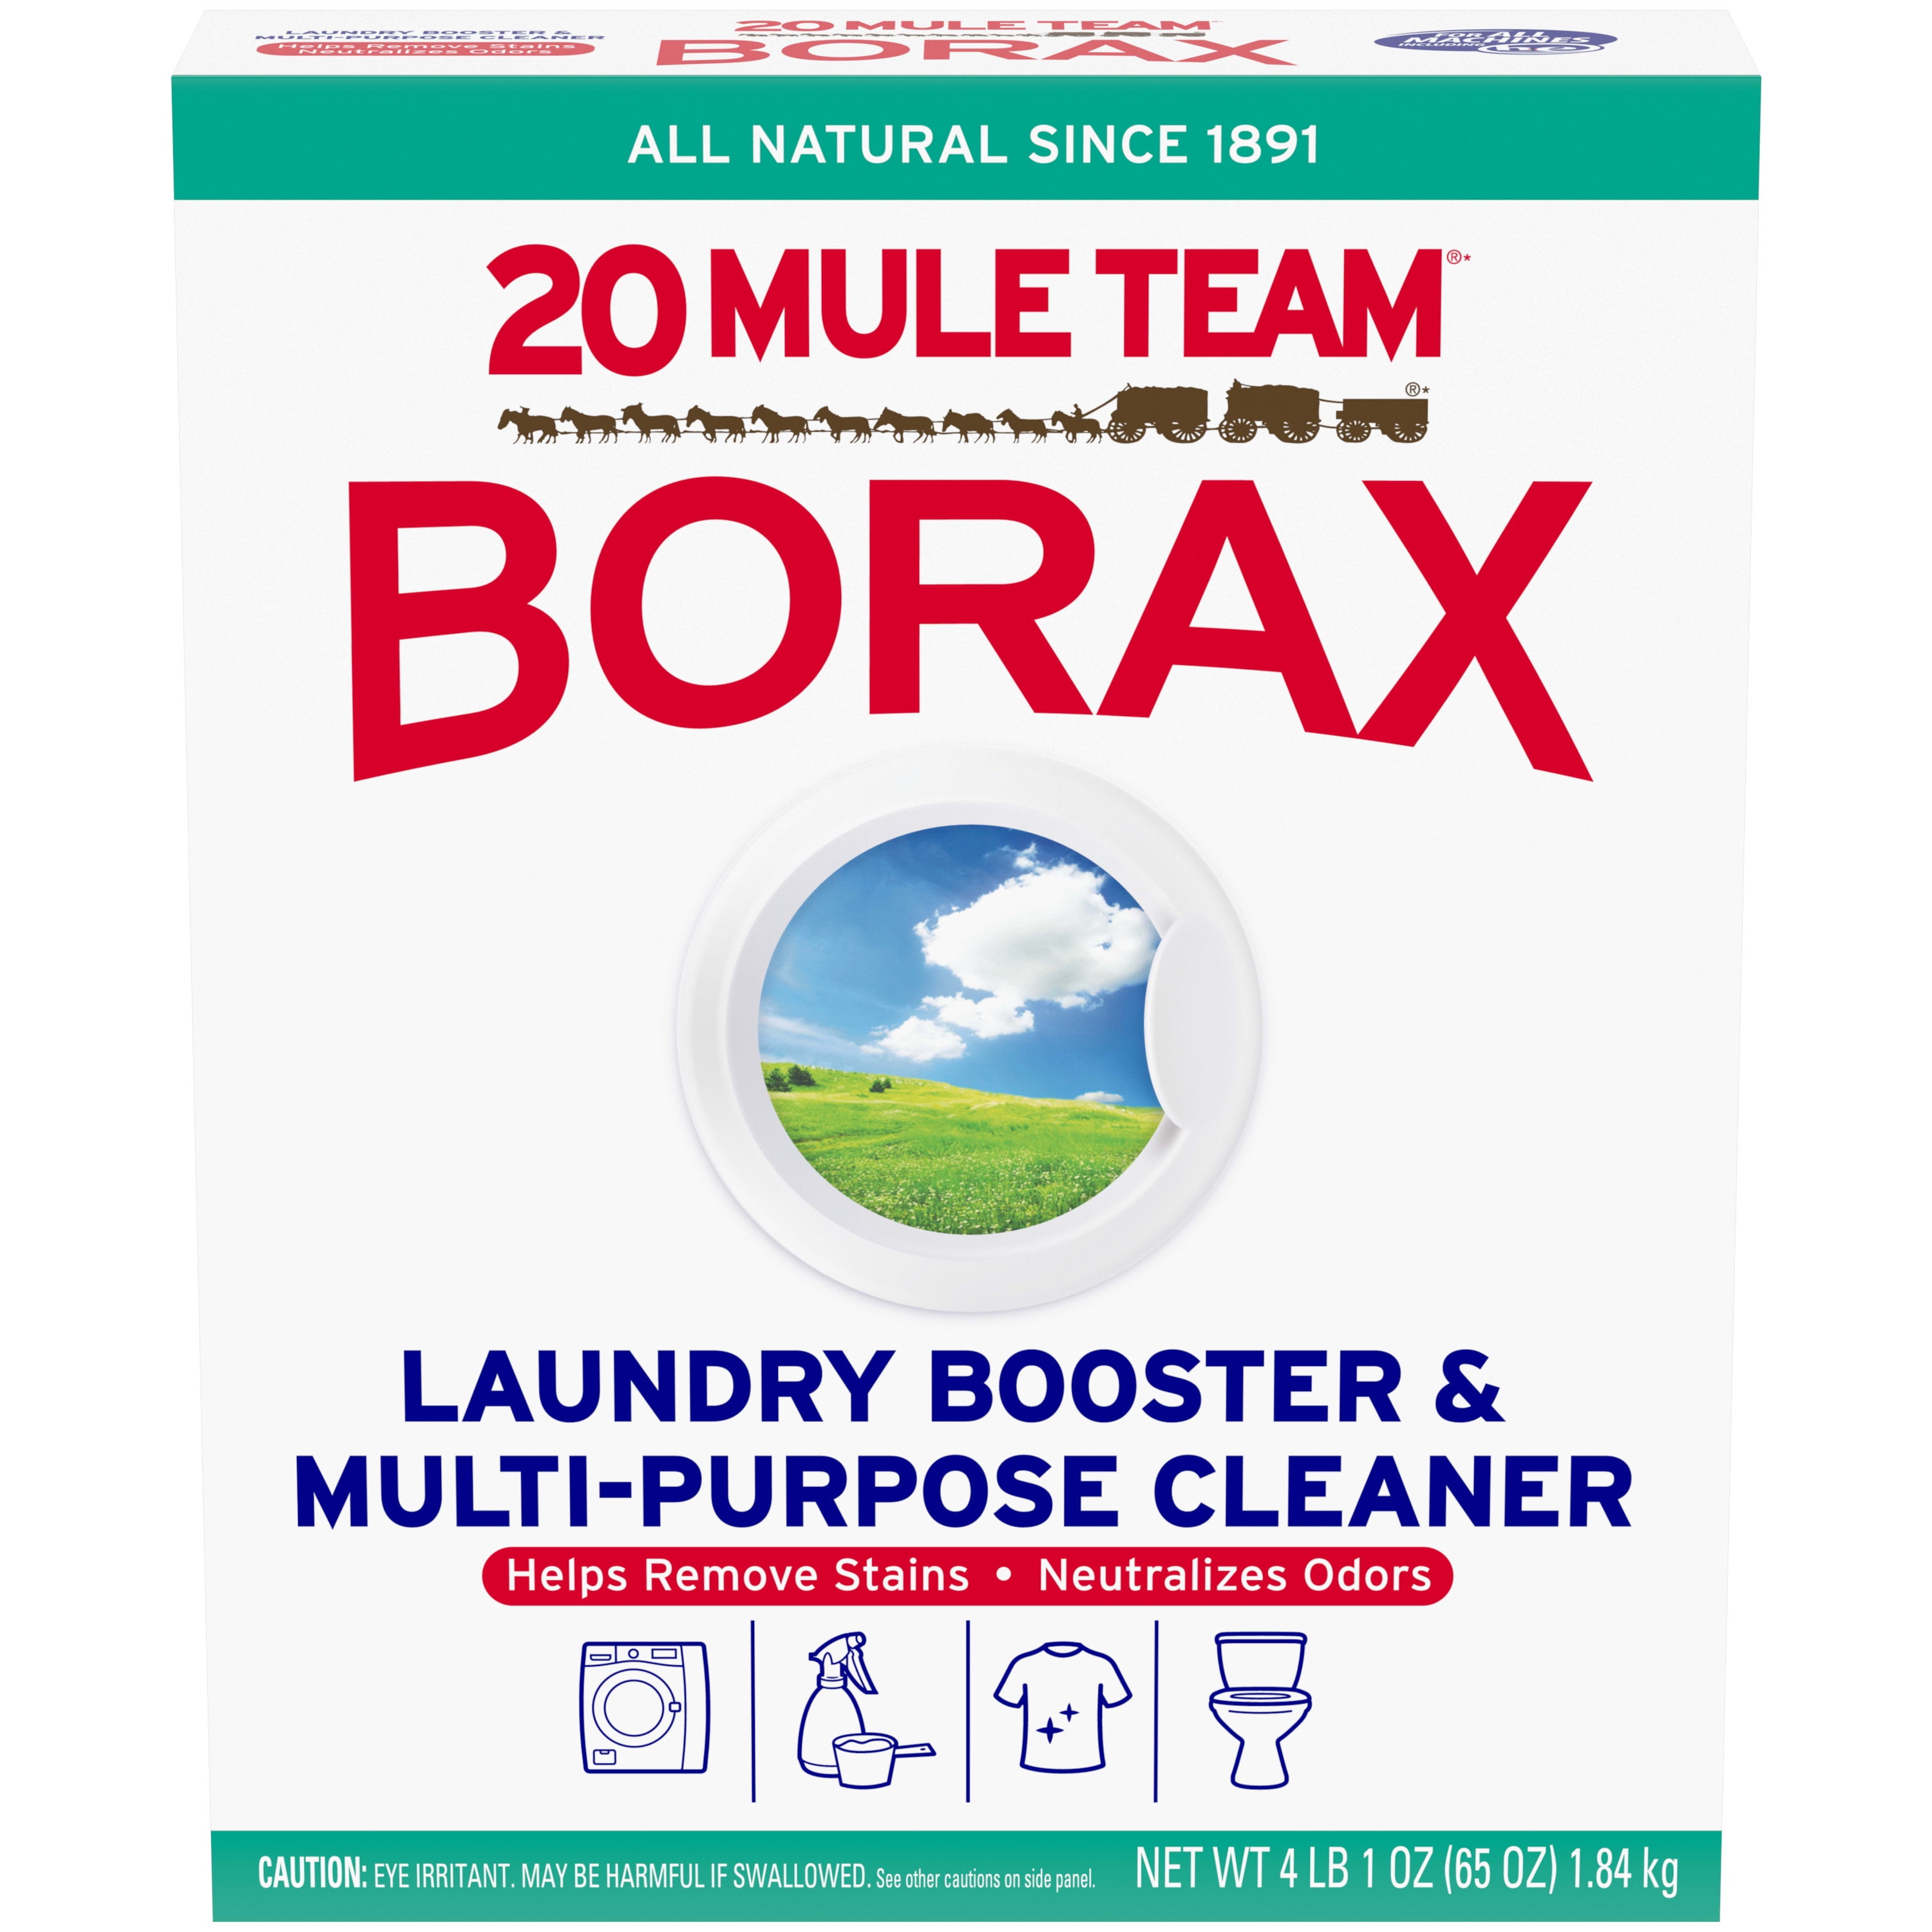 Uses For Borax Powder For Cleaning, Laundry, Stain Removal And More